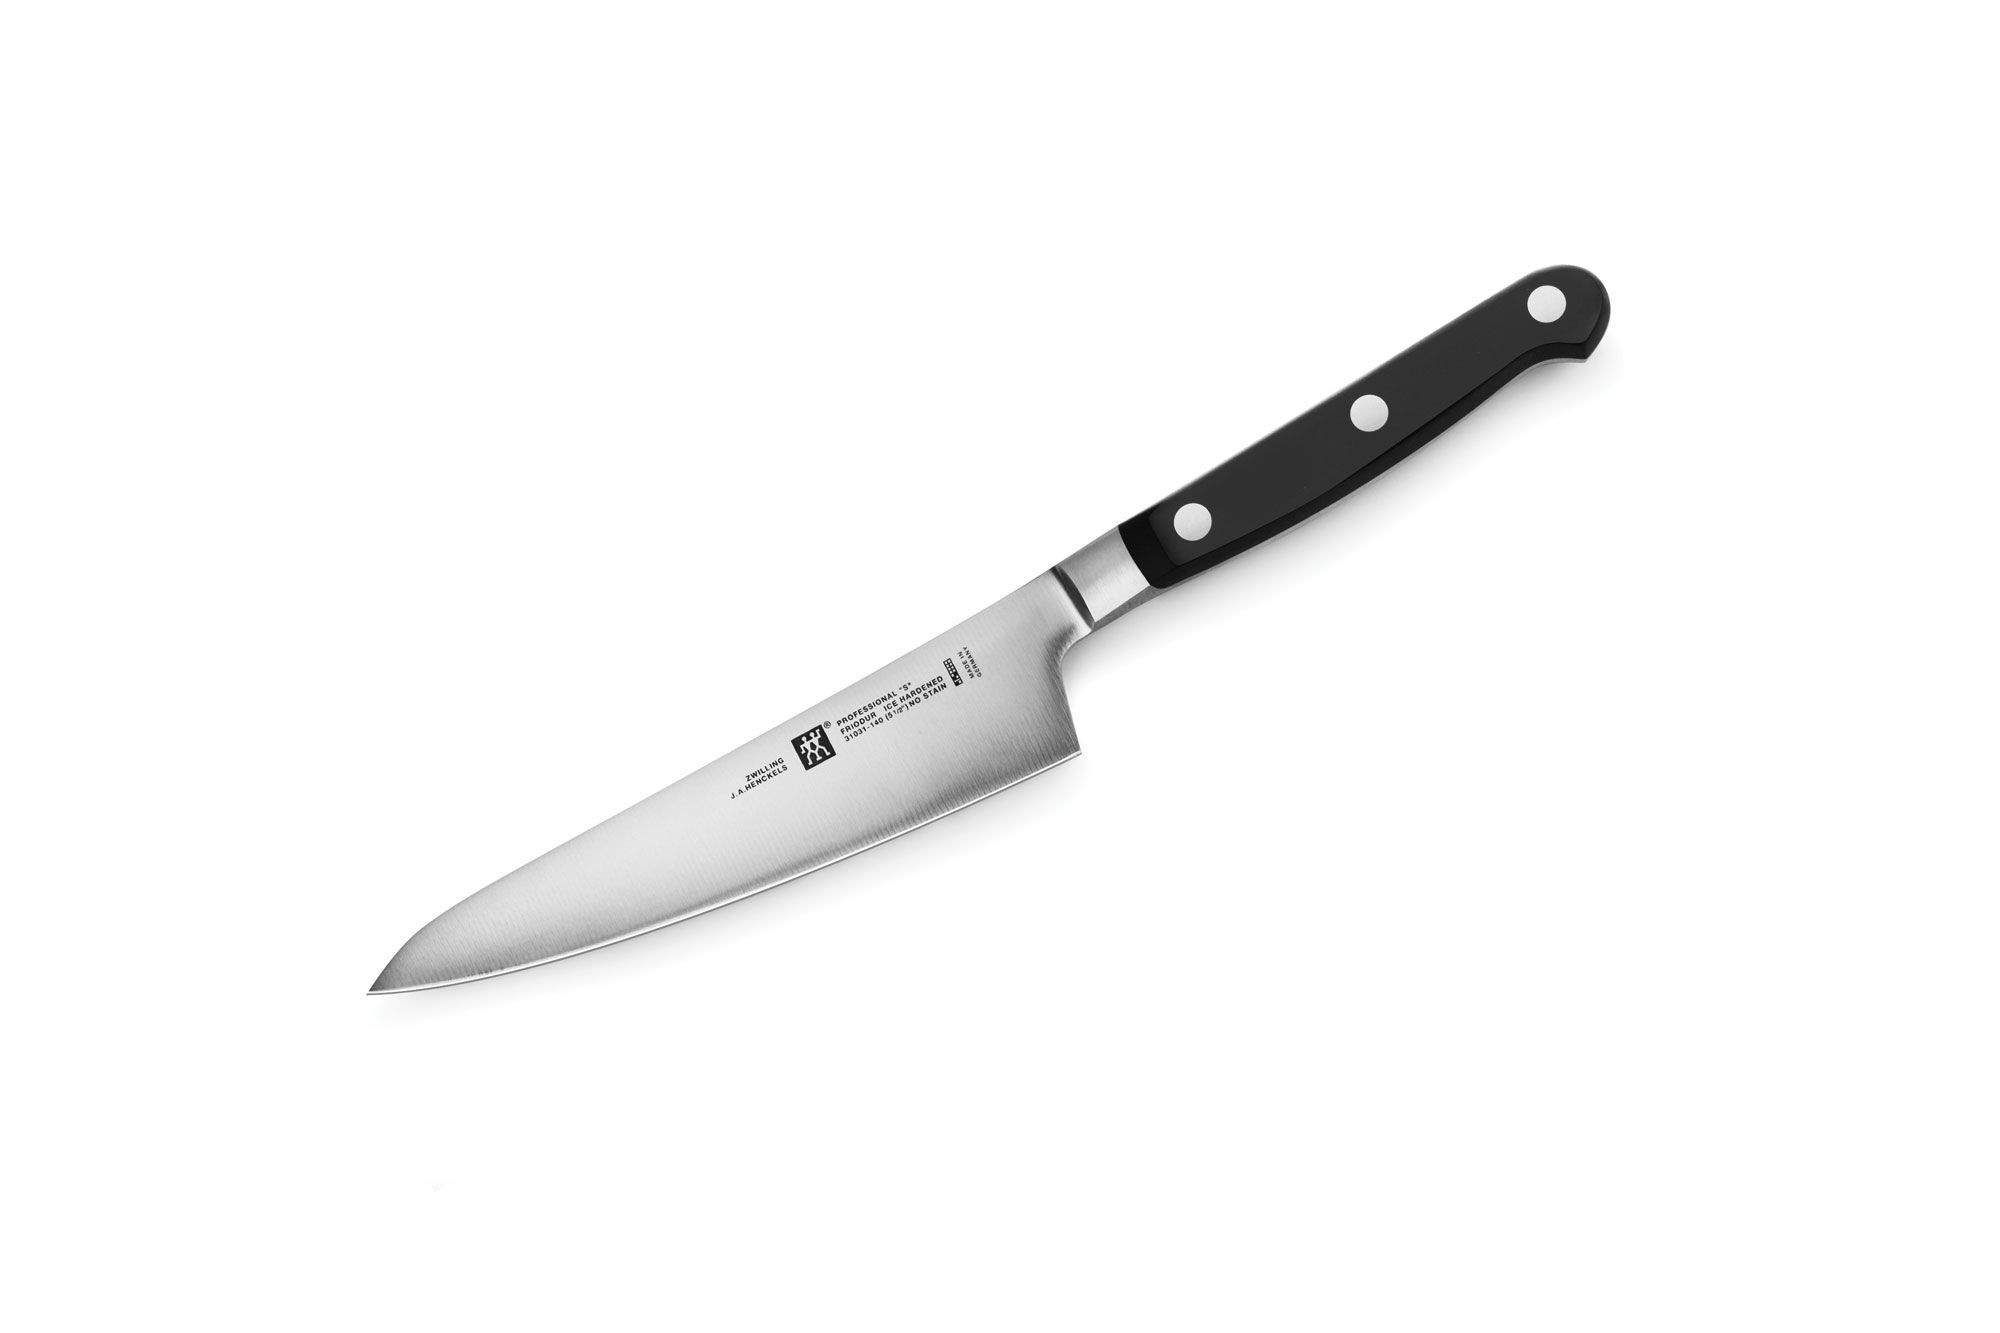 ZWILLING Pro Ultimate Prep Knife, 5.5-inch, Black/Stainless Steel